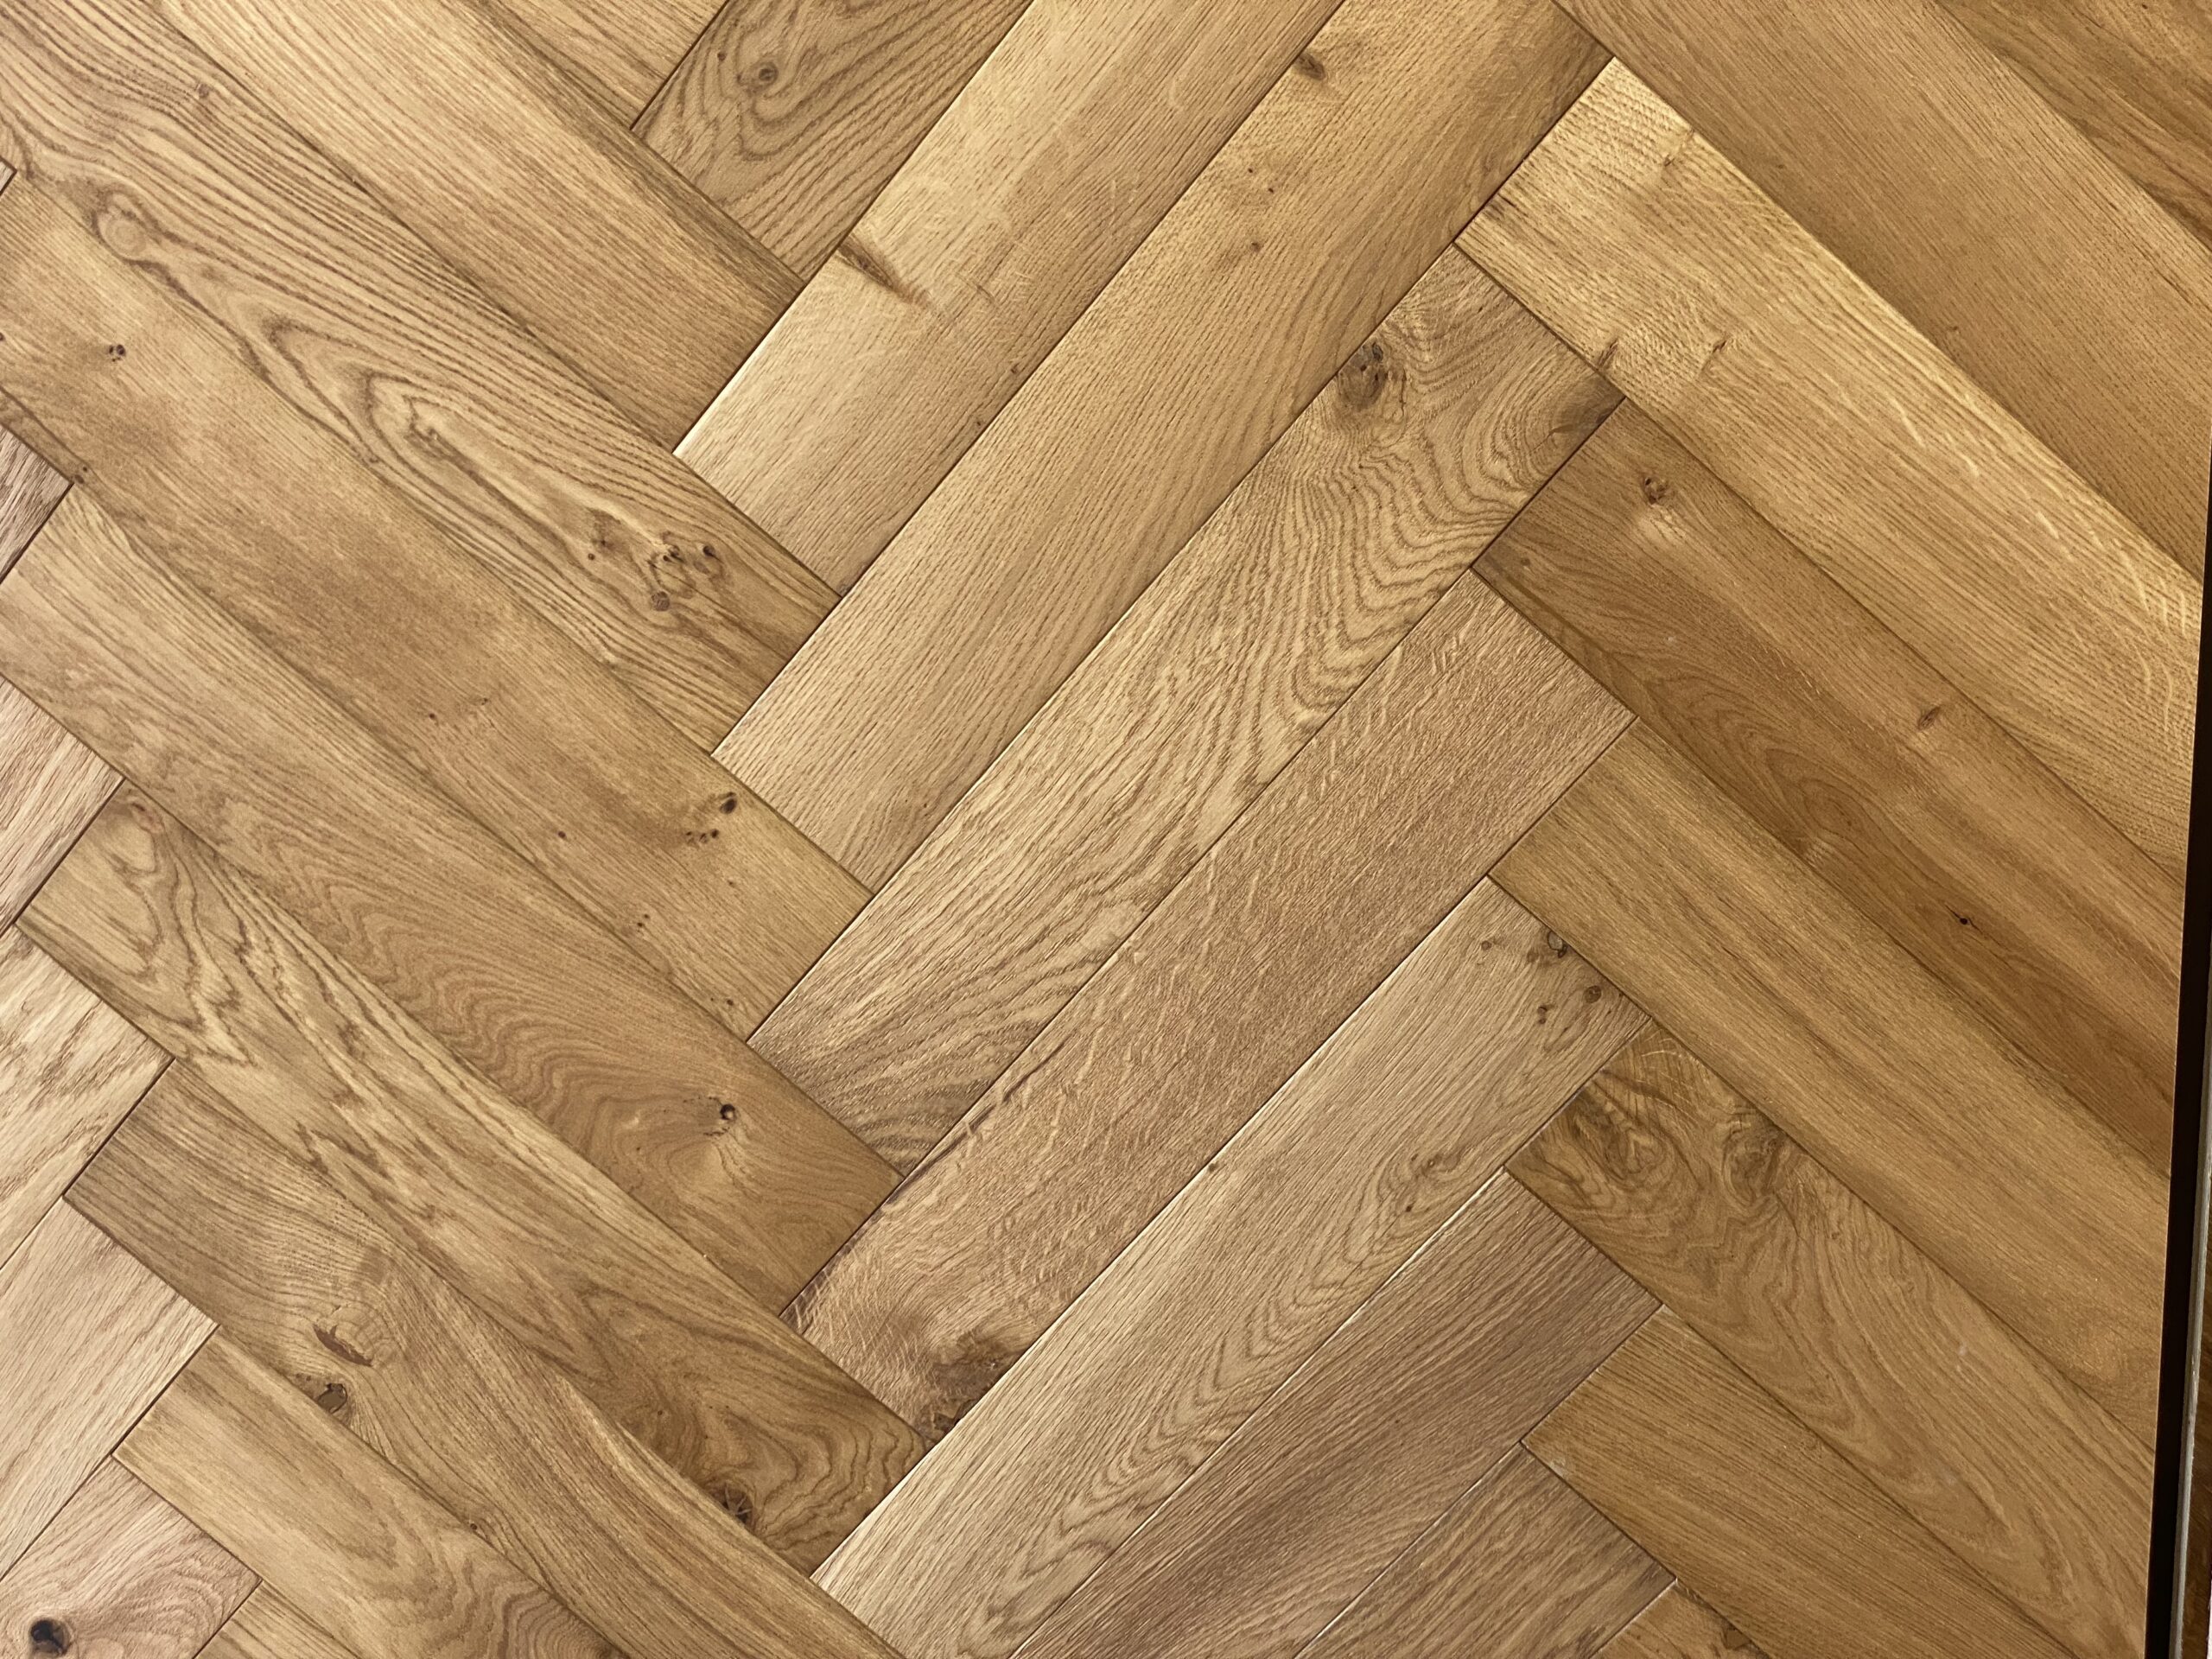 Fine Quality Engineered Oak Herringbone Parquet Wood Floors Brushed and Oiled, 18/4 x 90 x 500mm at Original Oak Flooring, Solstice Park Amesbury Wiltshire. Nationwide Delivery Service 2-3 days